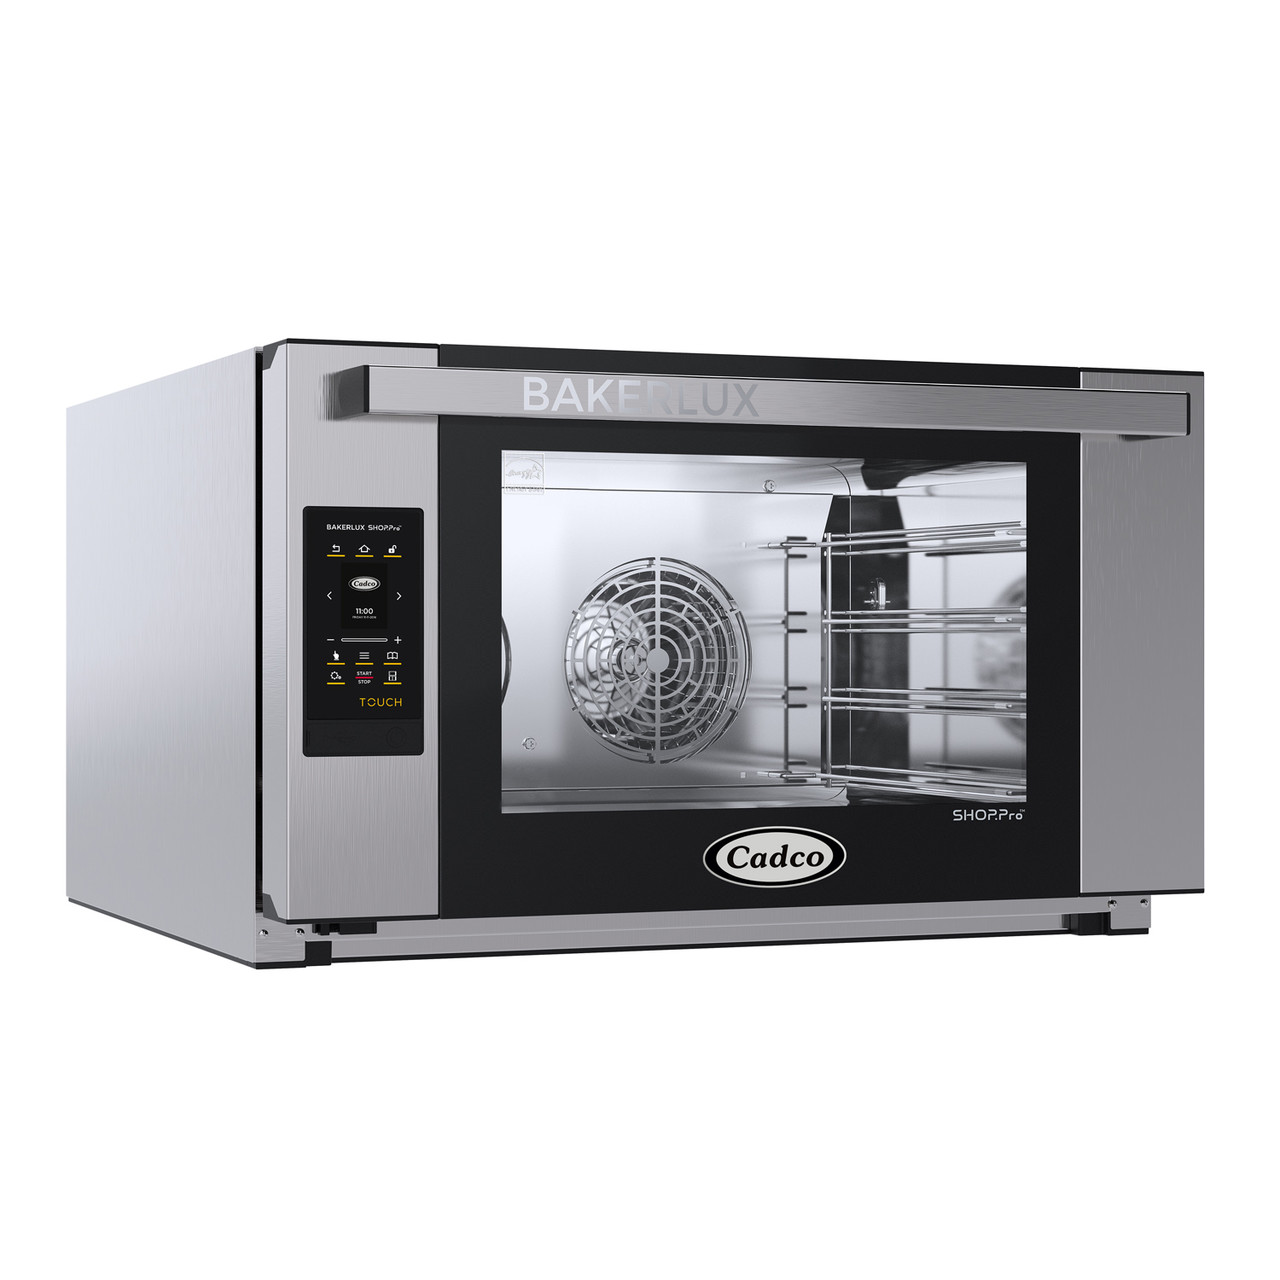 Cadco XAFT-04FS-TD Bakerlux TOUCH Full Size Convection Oven w/ Humidity - Electric